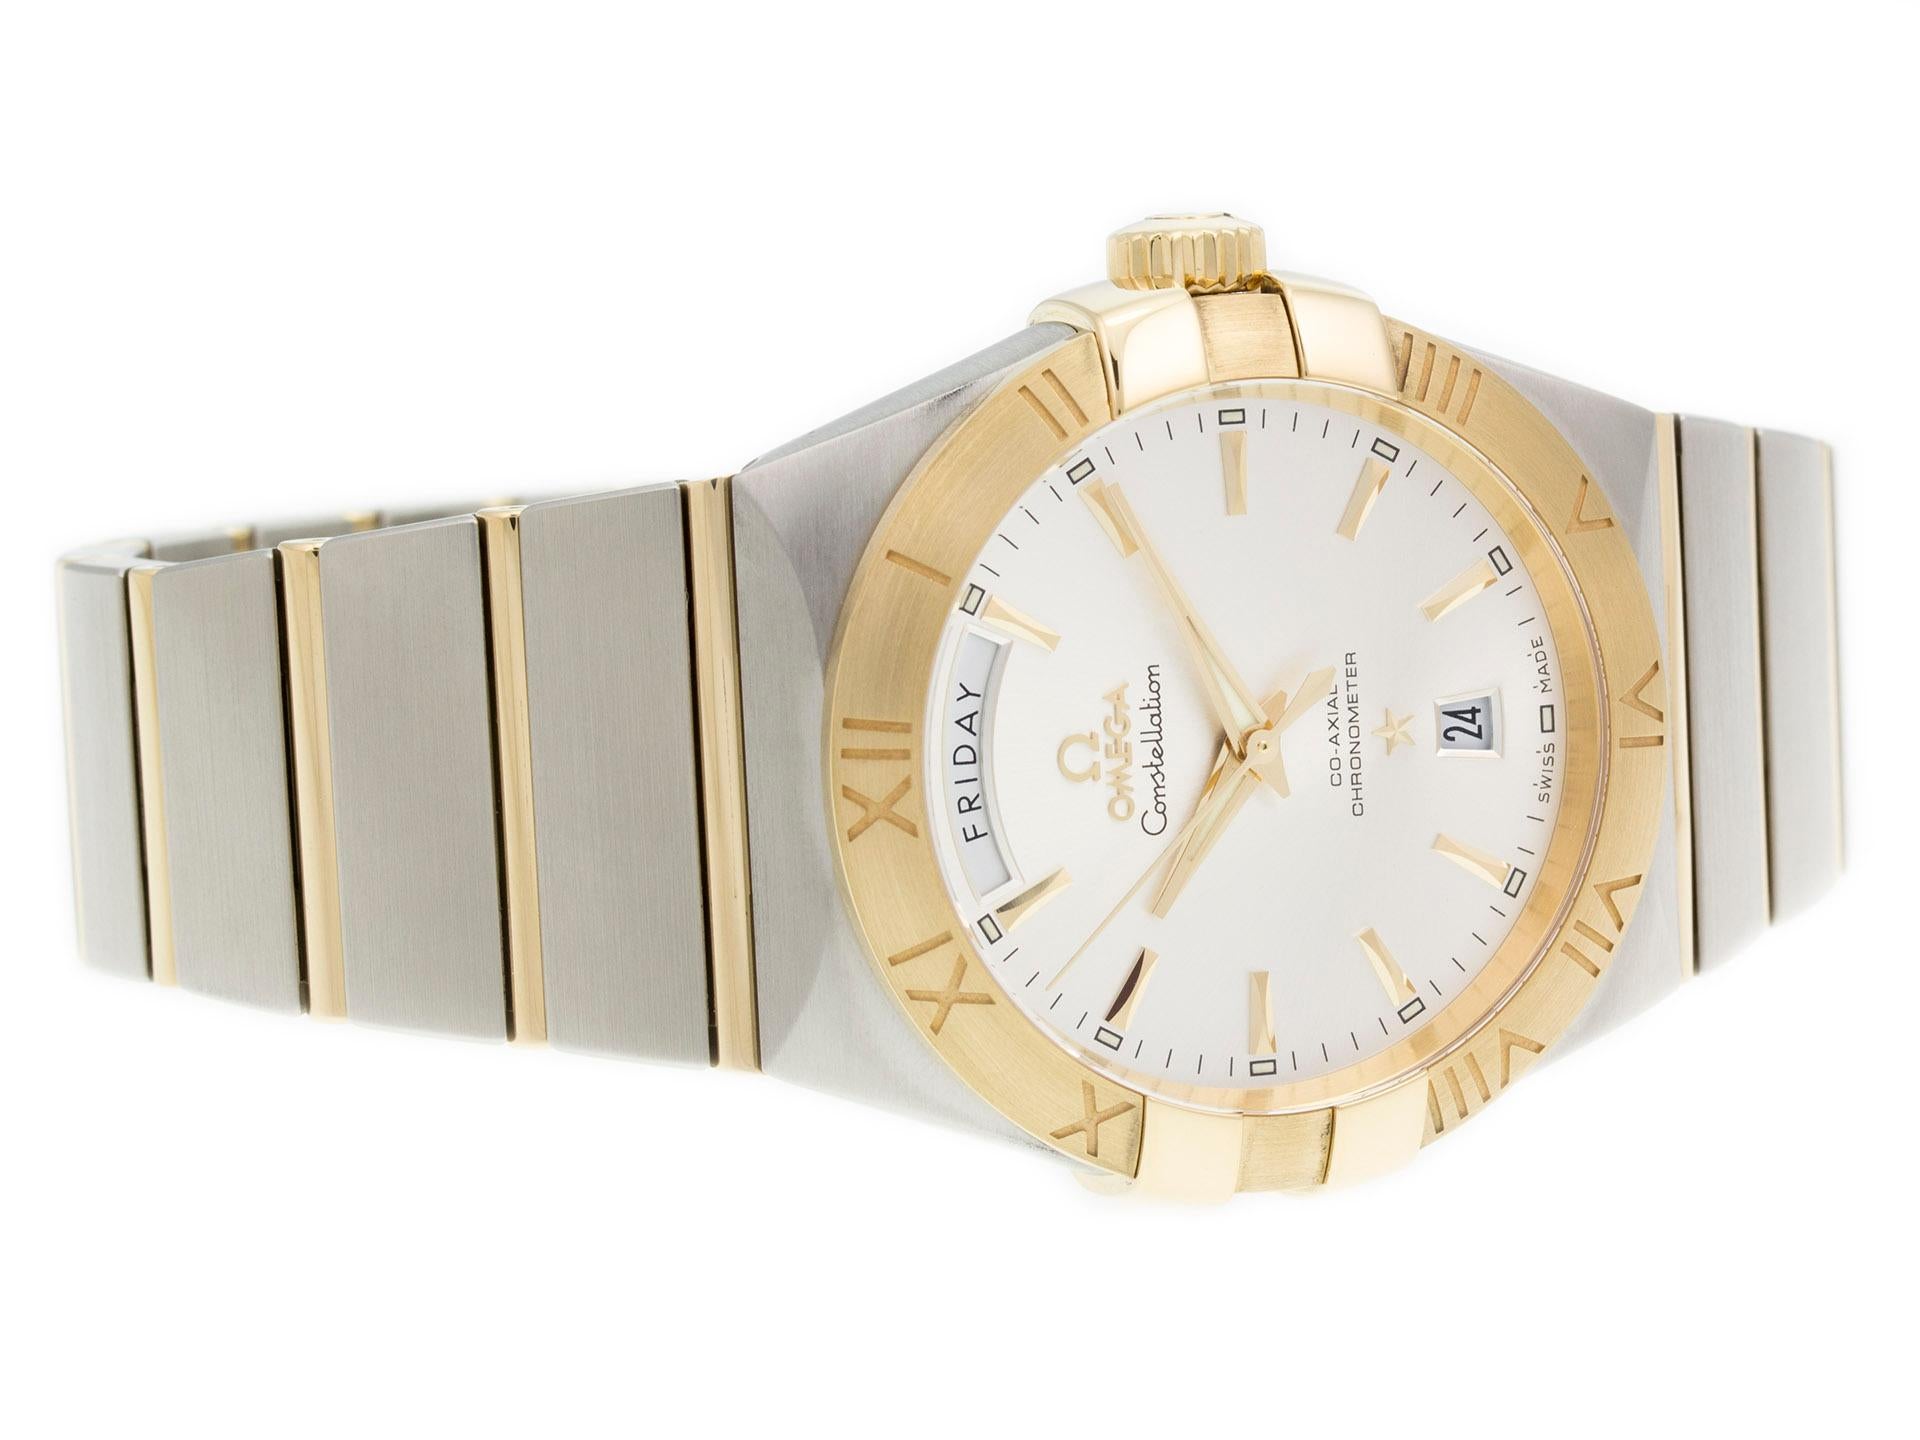 Omega Constellation Day Date 123.20.38.22.02.002 In Excellent Condition For Sale In Willow Grove, PA